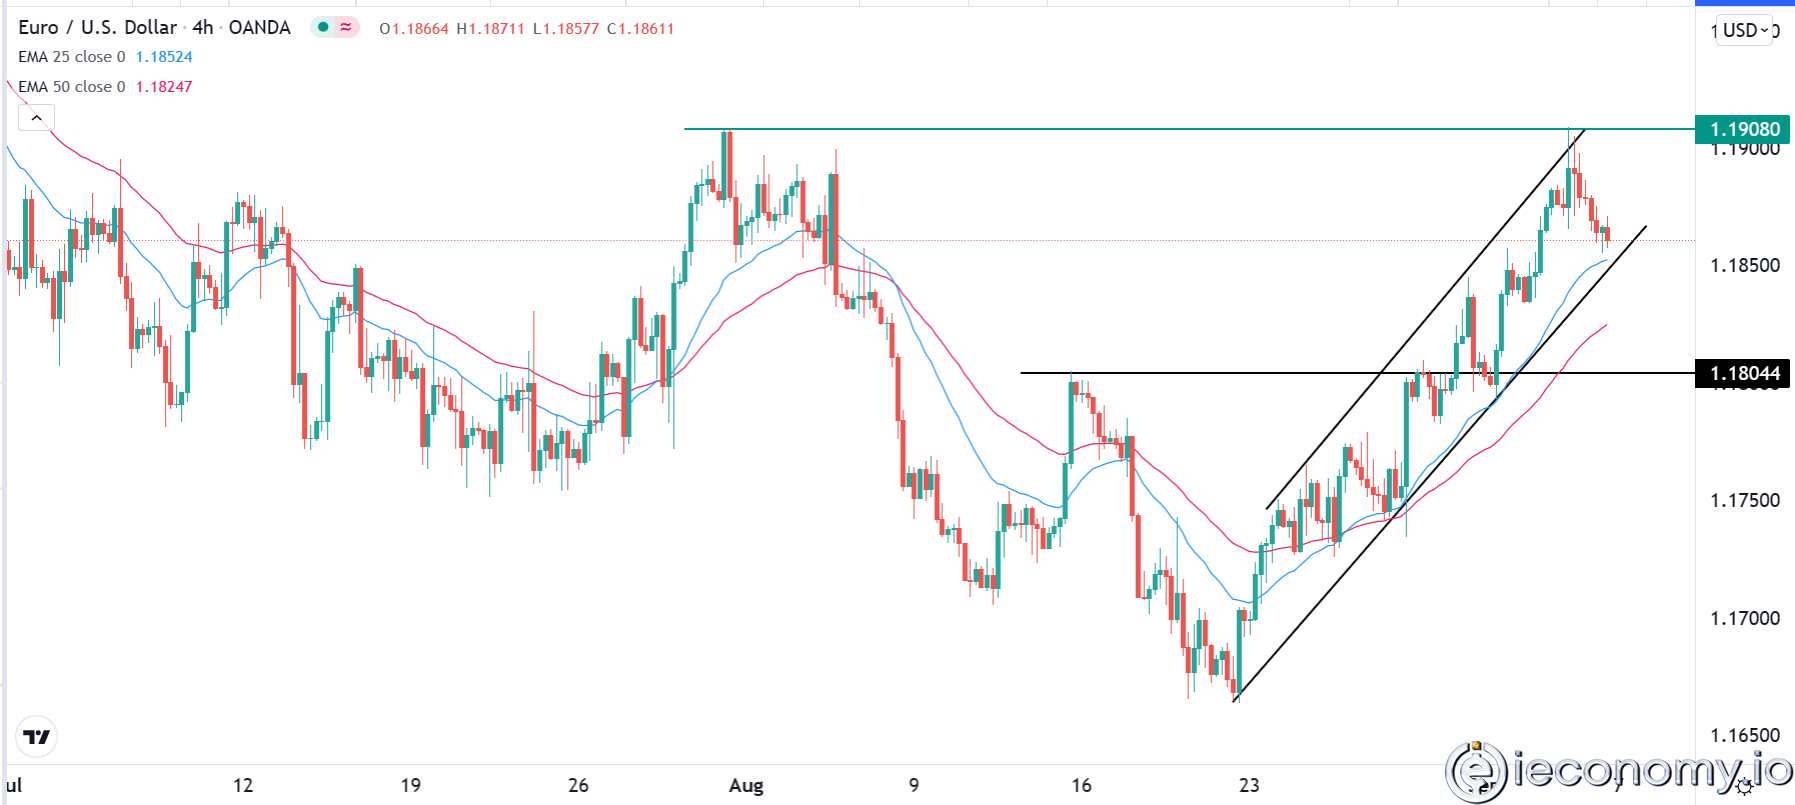 Forex Signal For EUR/USD: Extremely High Above 1,1900